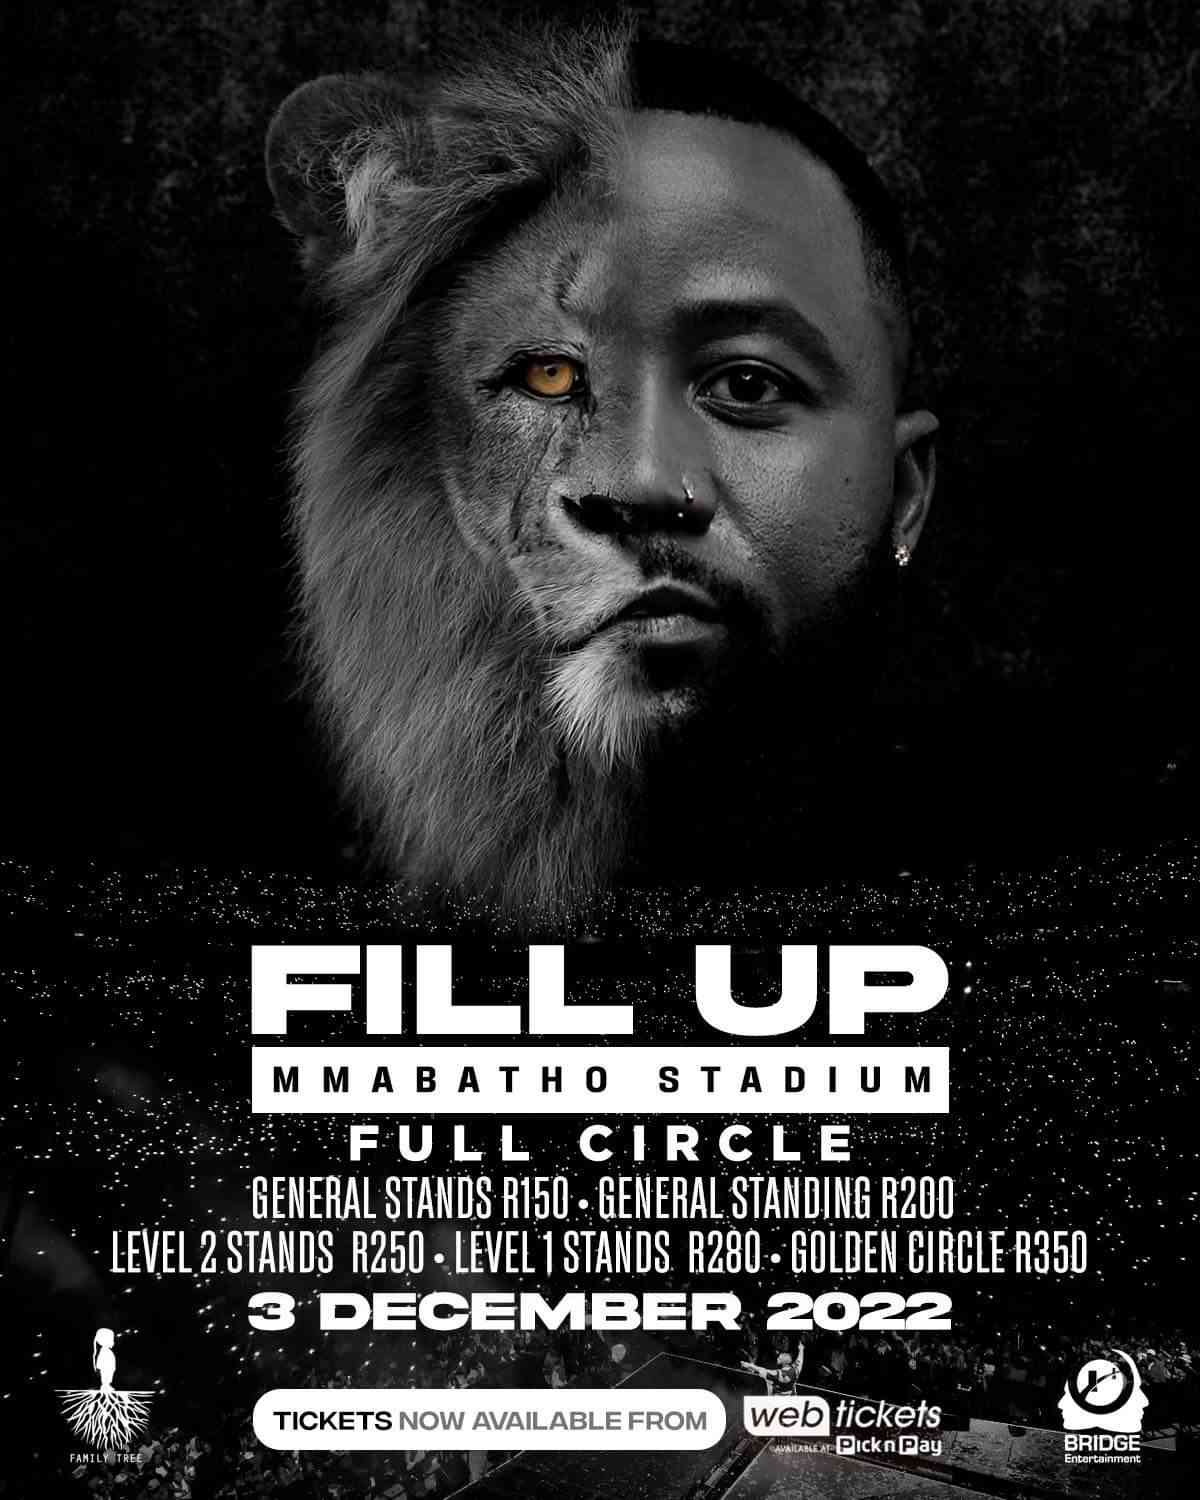 Fill Up Mmabatho Stadium: Cassper Nyovest Prepares For Another Massive Show